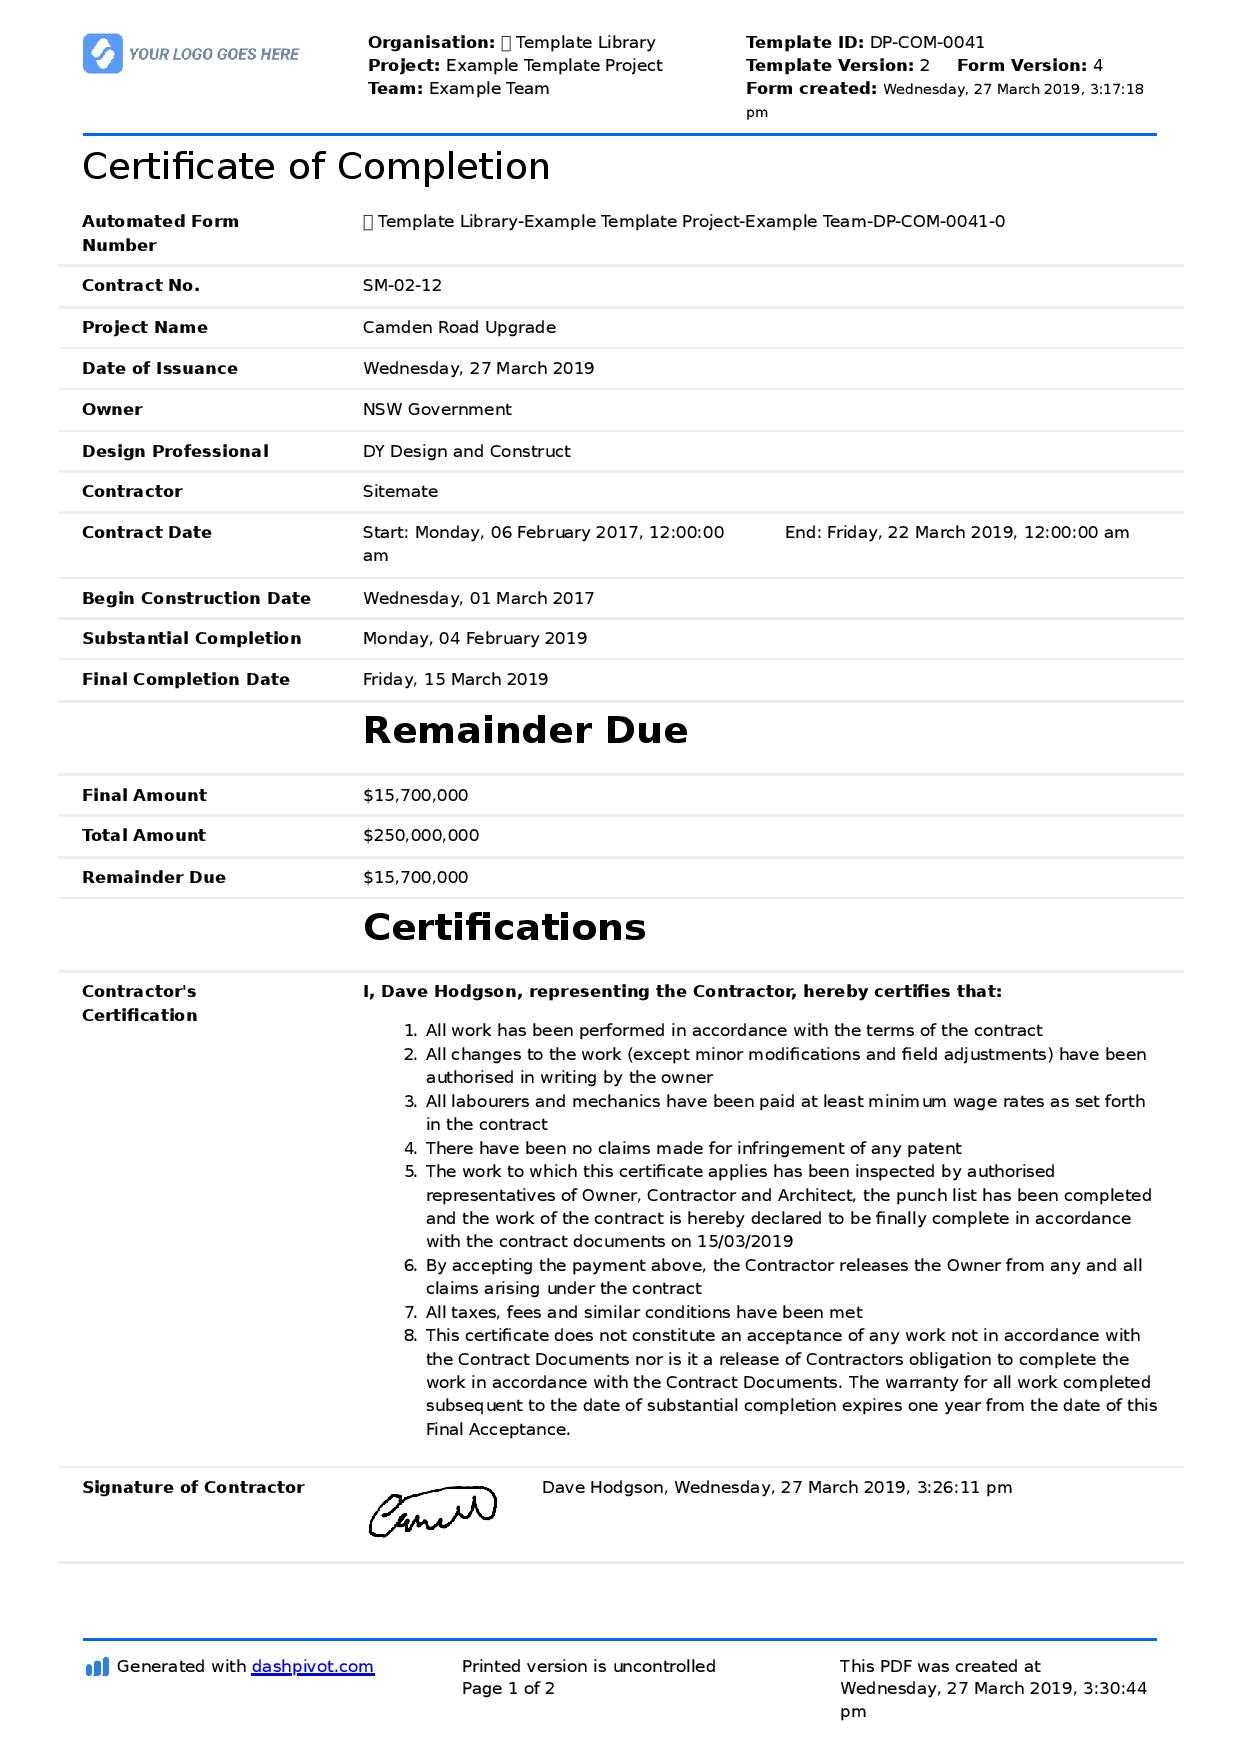 Certificate Of Completion For Construction (Free Template + Throughout Certificate Of Completion Construction Templates